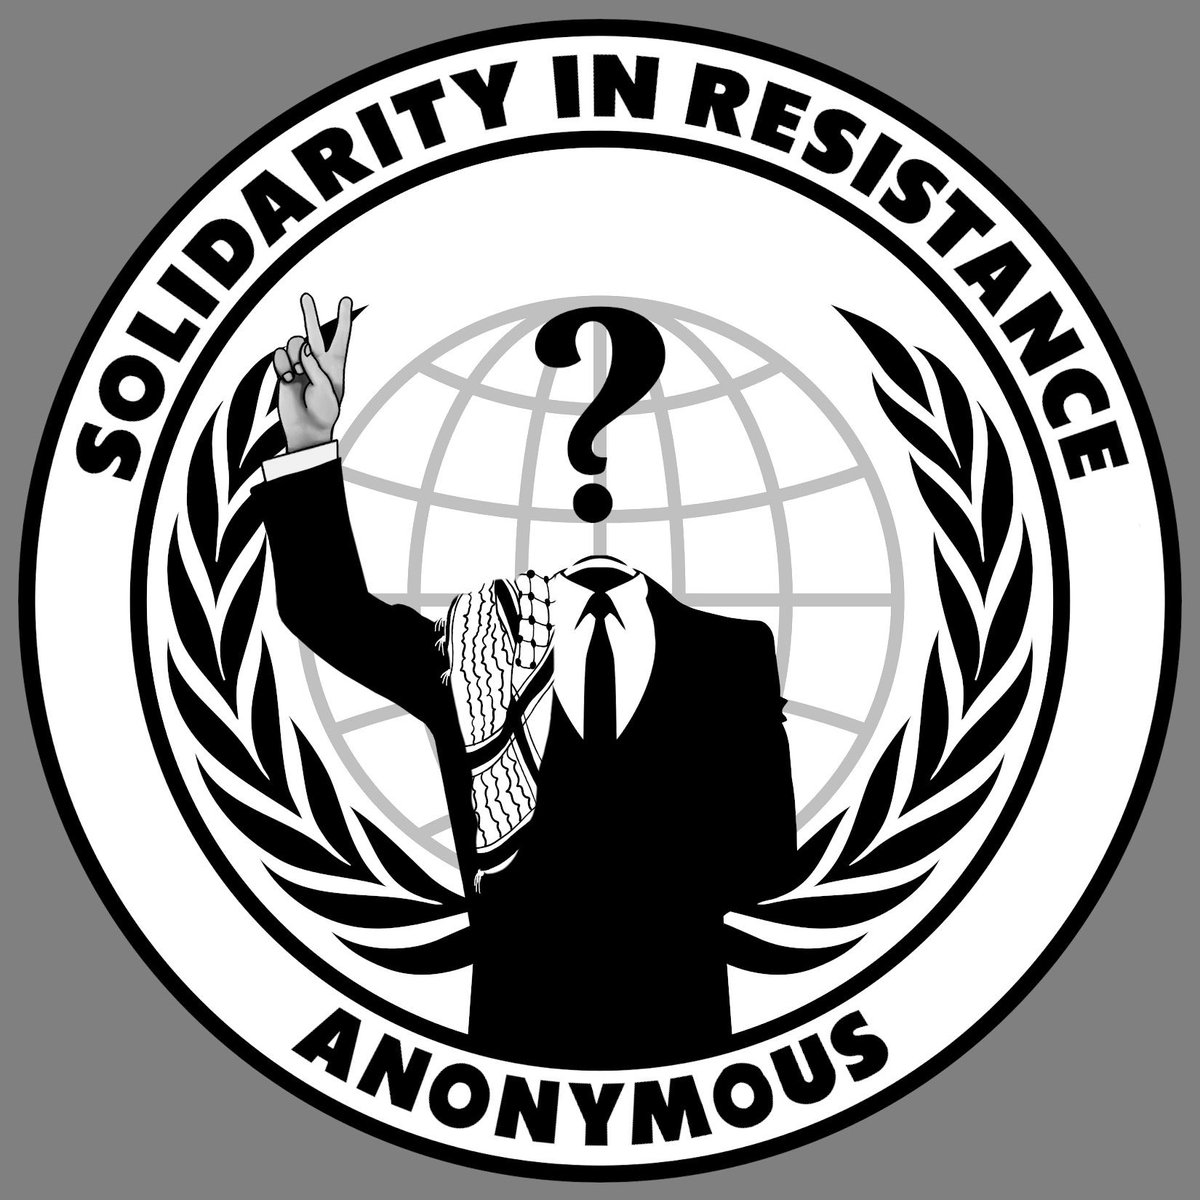 #Anonymous stands with #StudentProtests 
Warning to all police departments attacking peaceful protesters during #Occupy4Gaza 

Chicago Police Department is #Tangodown by our cyber attack

❌home.chicagopolice.org
🌟check-host.net/check-report/1…

#DARKSTORM